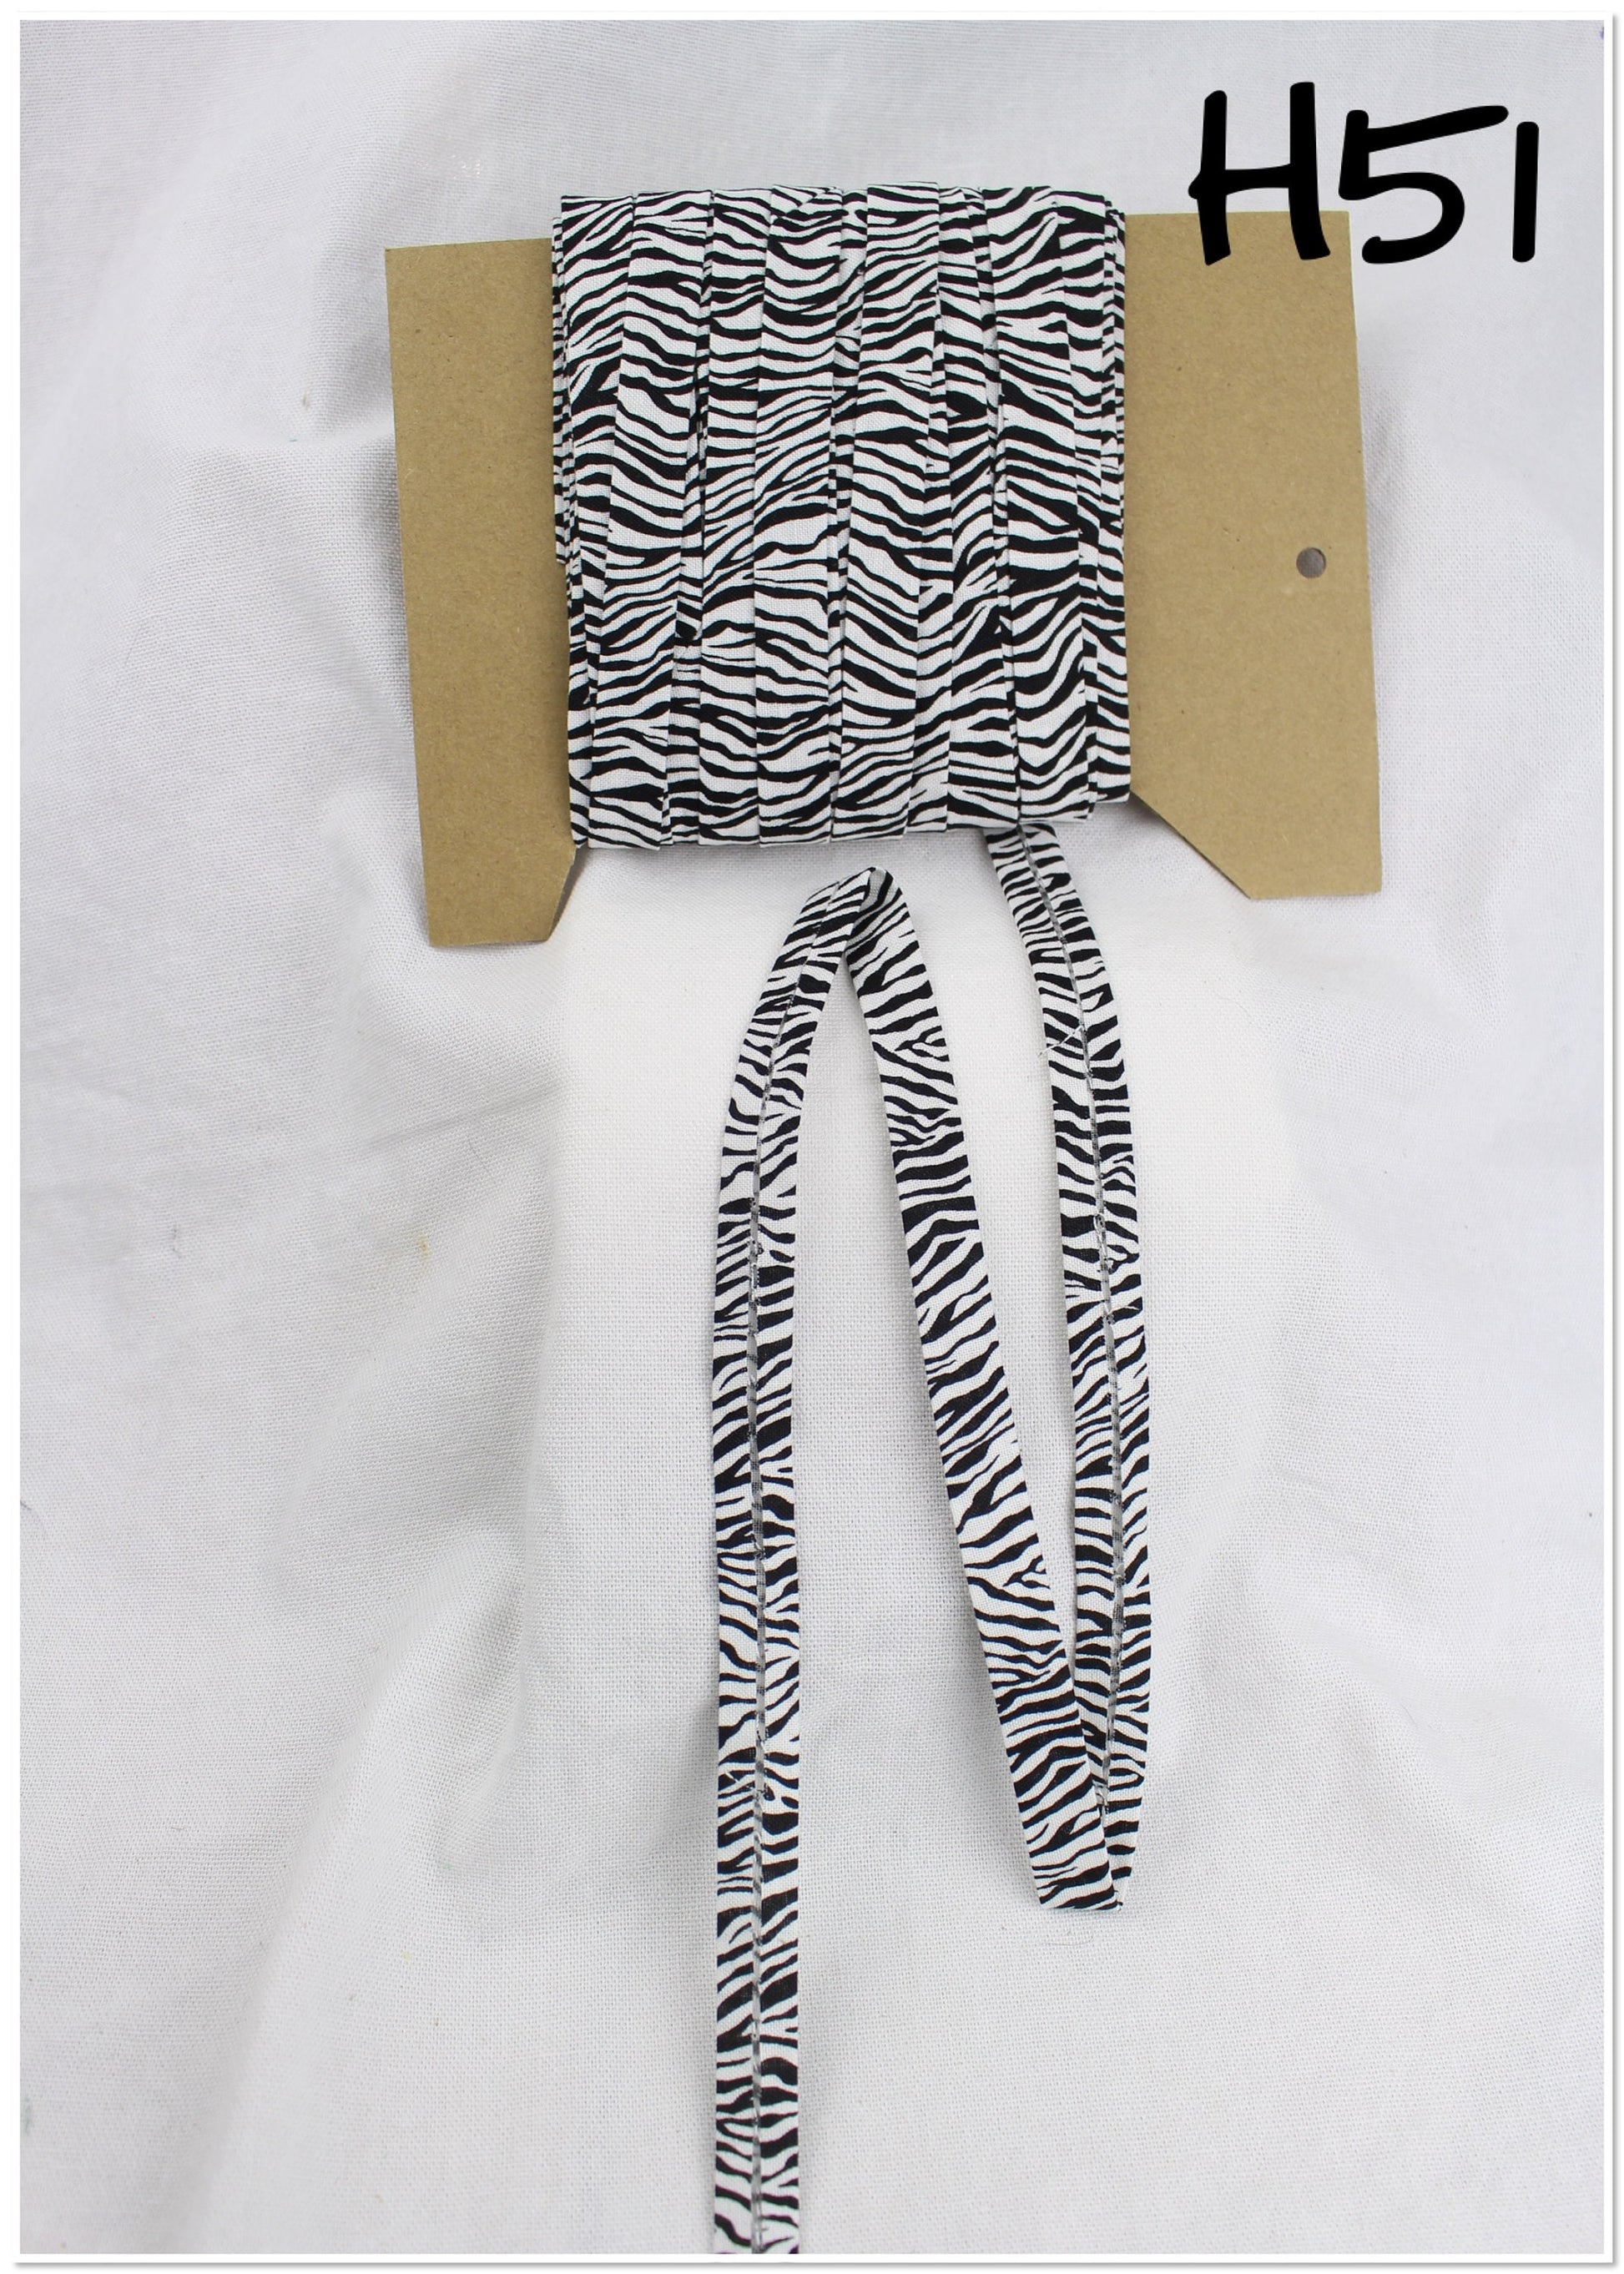 Bias Binding (Tape) 12mm, Cotton, Single Fold, black and white dots and stripes. Fusible iron on available.